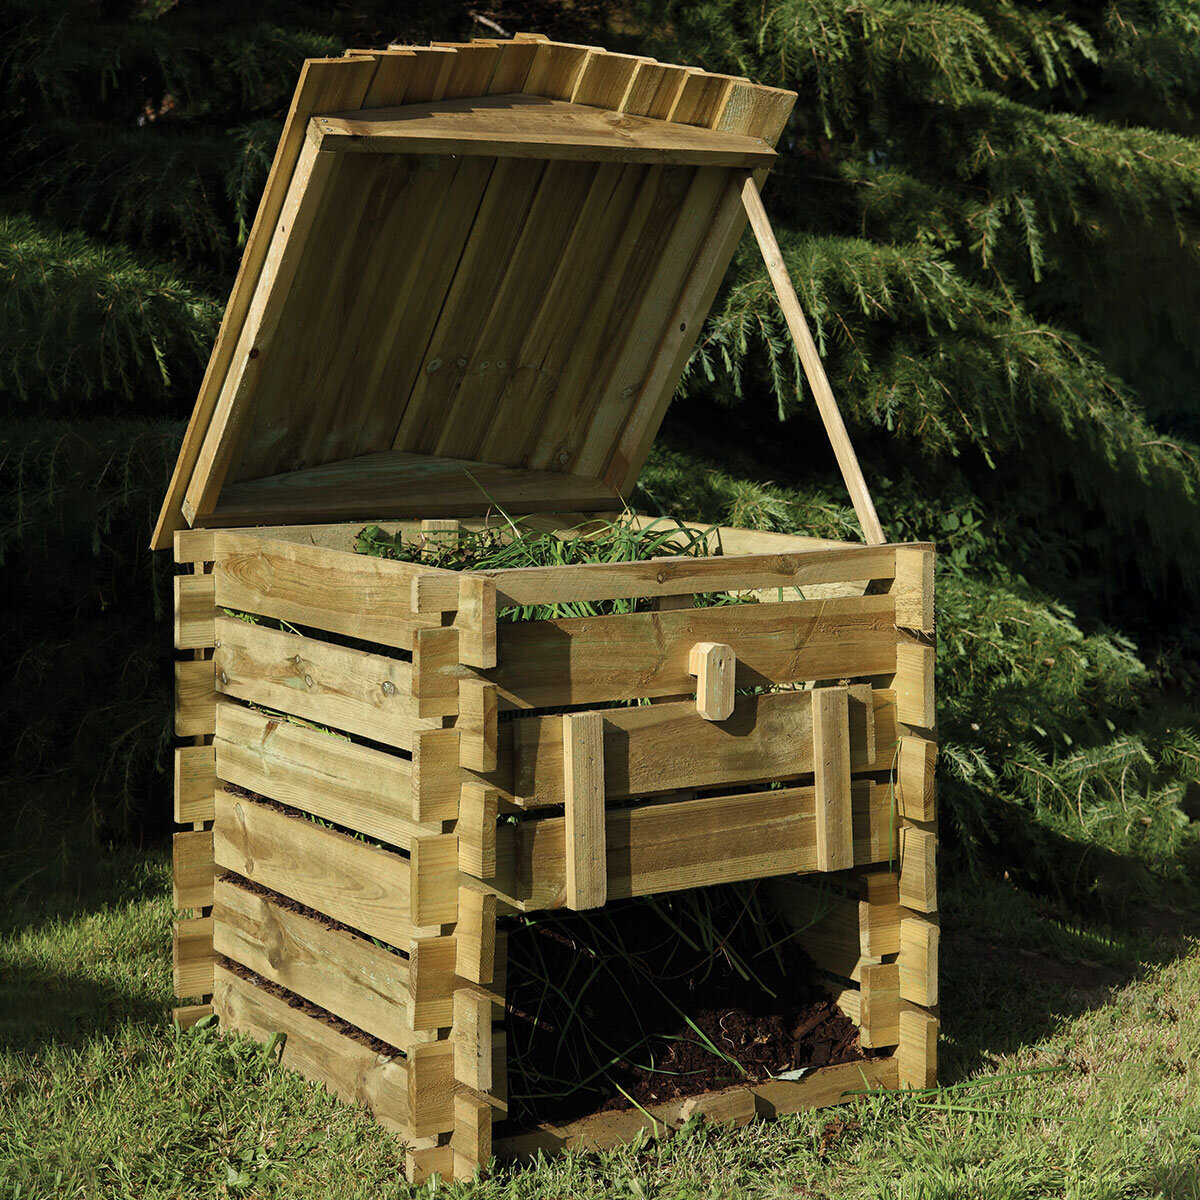 Forest Garden Wooden Beehive Composter